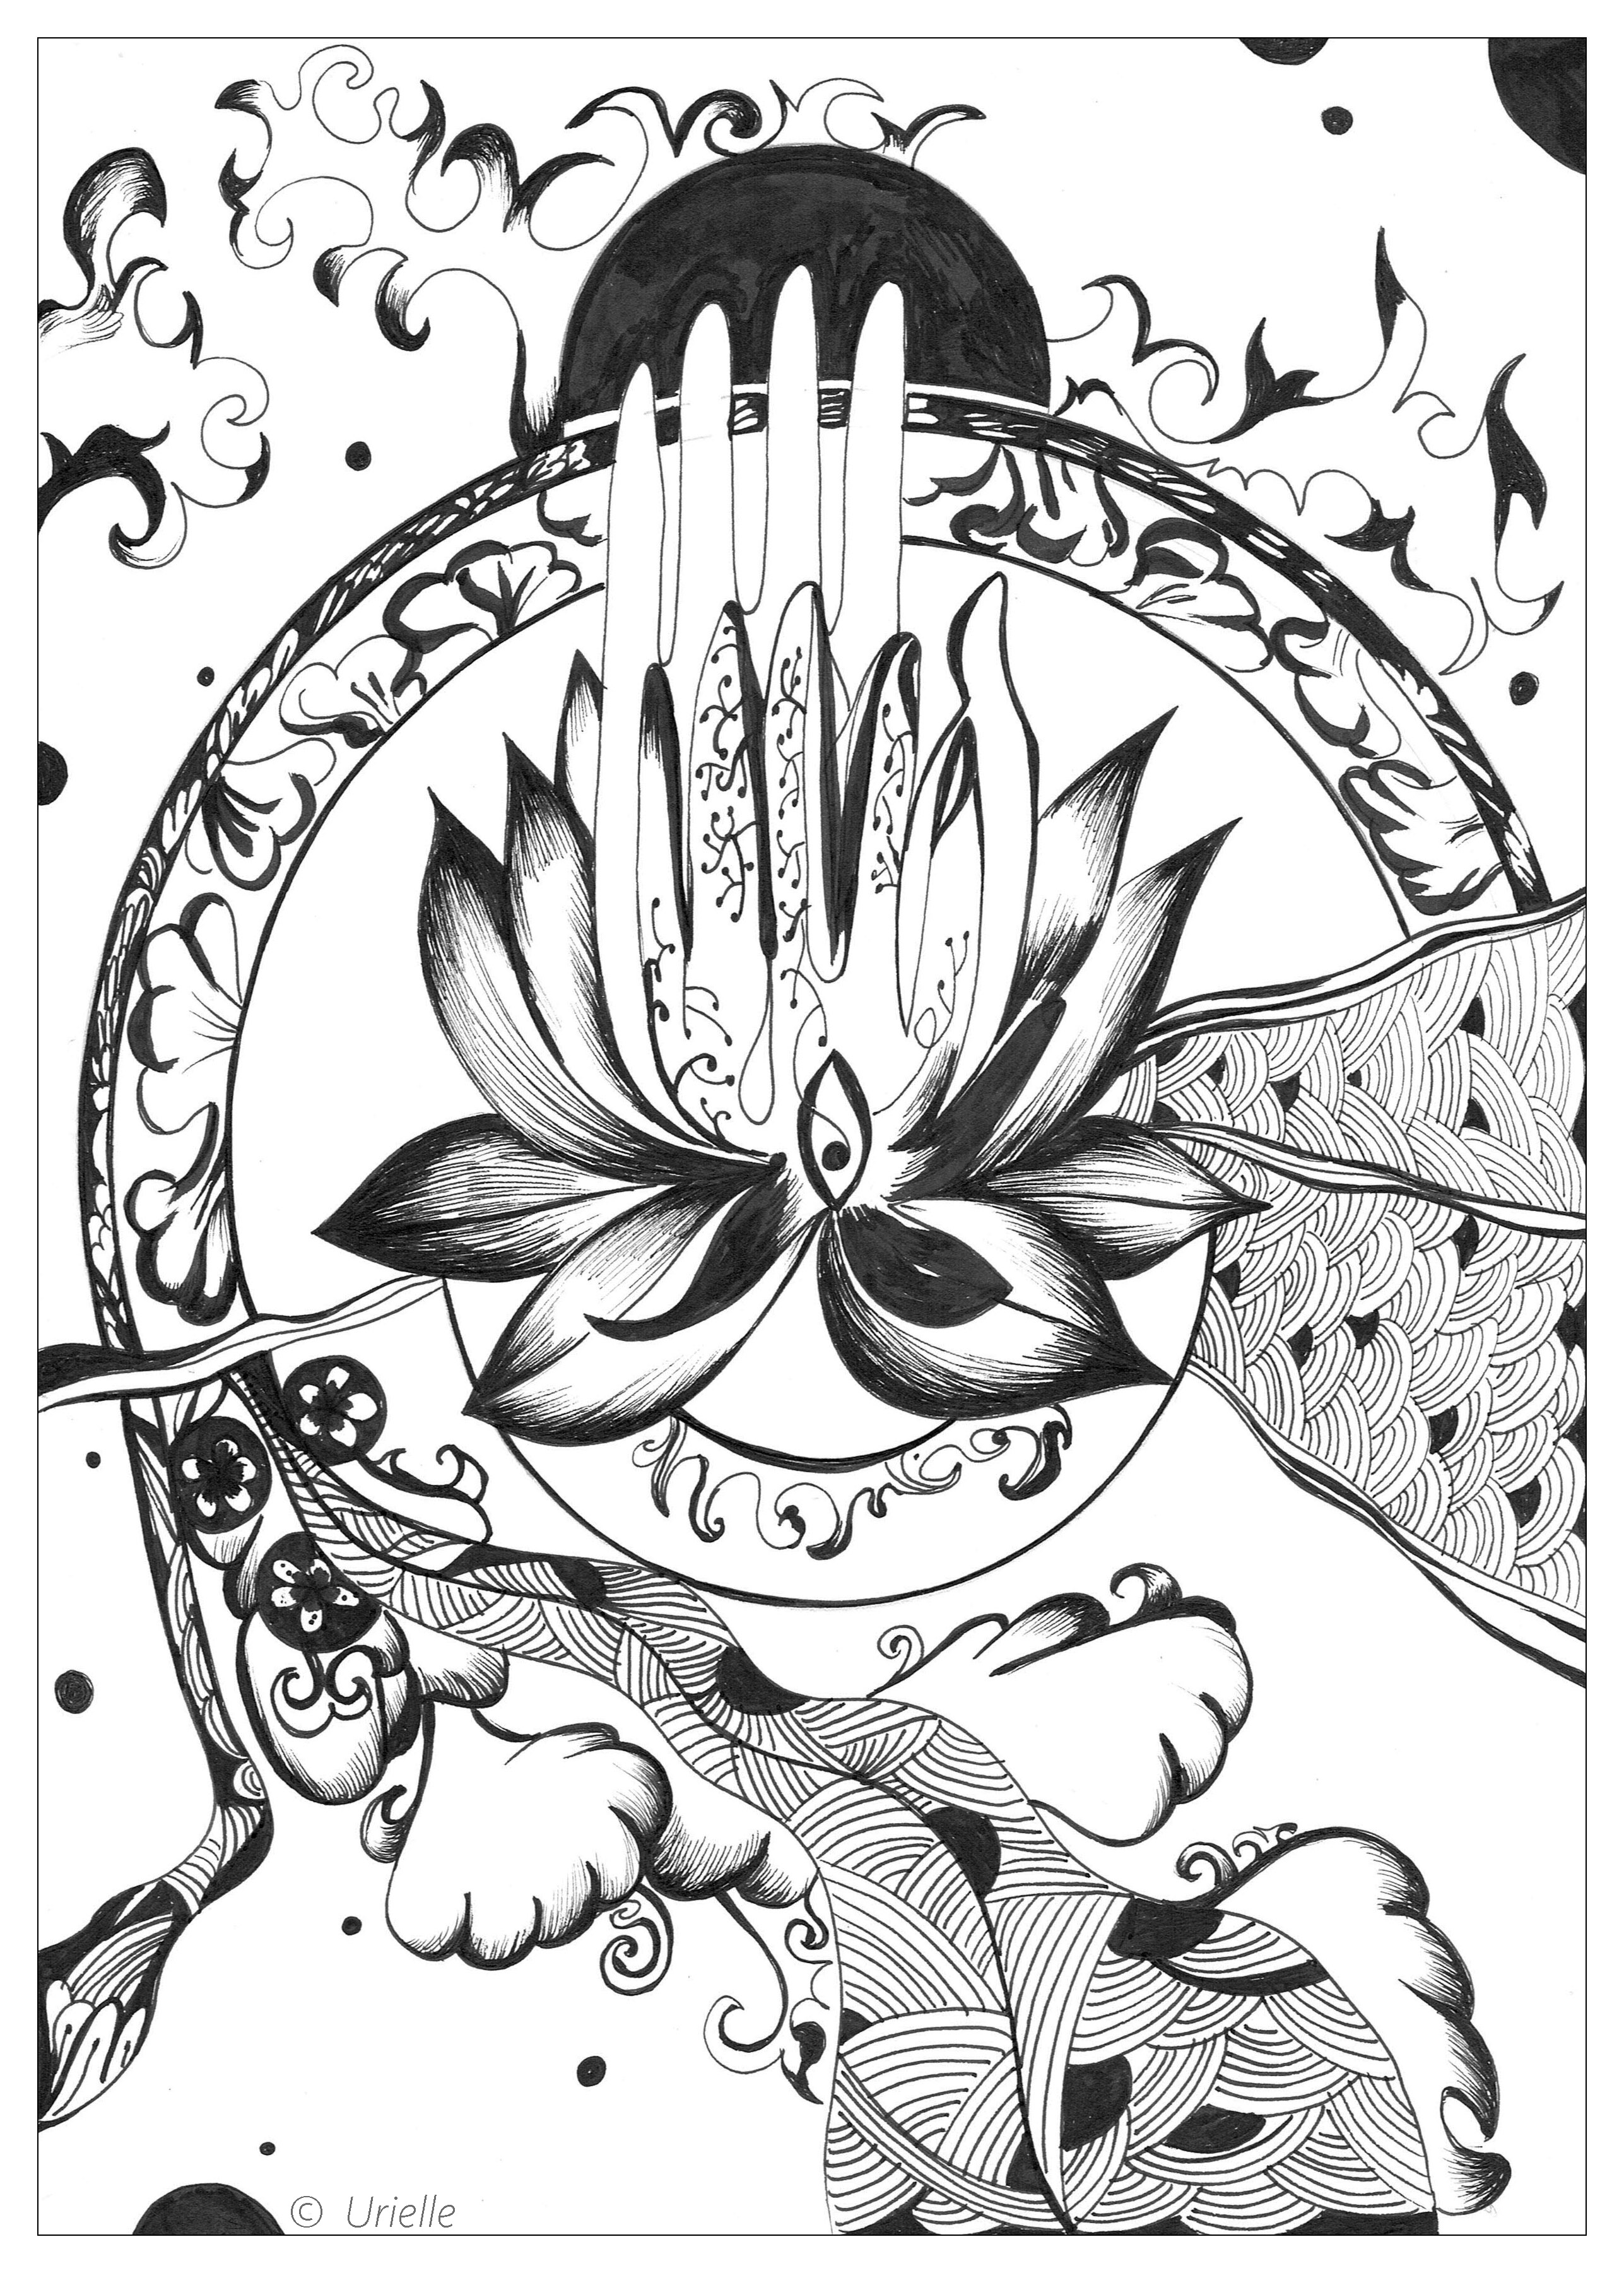 Urielle Peace Serenity Zen Anti Stress Coloring Pages Gallery Artist